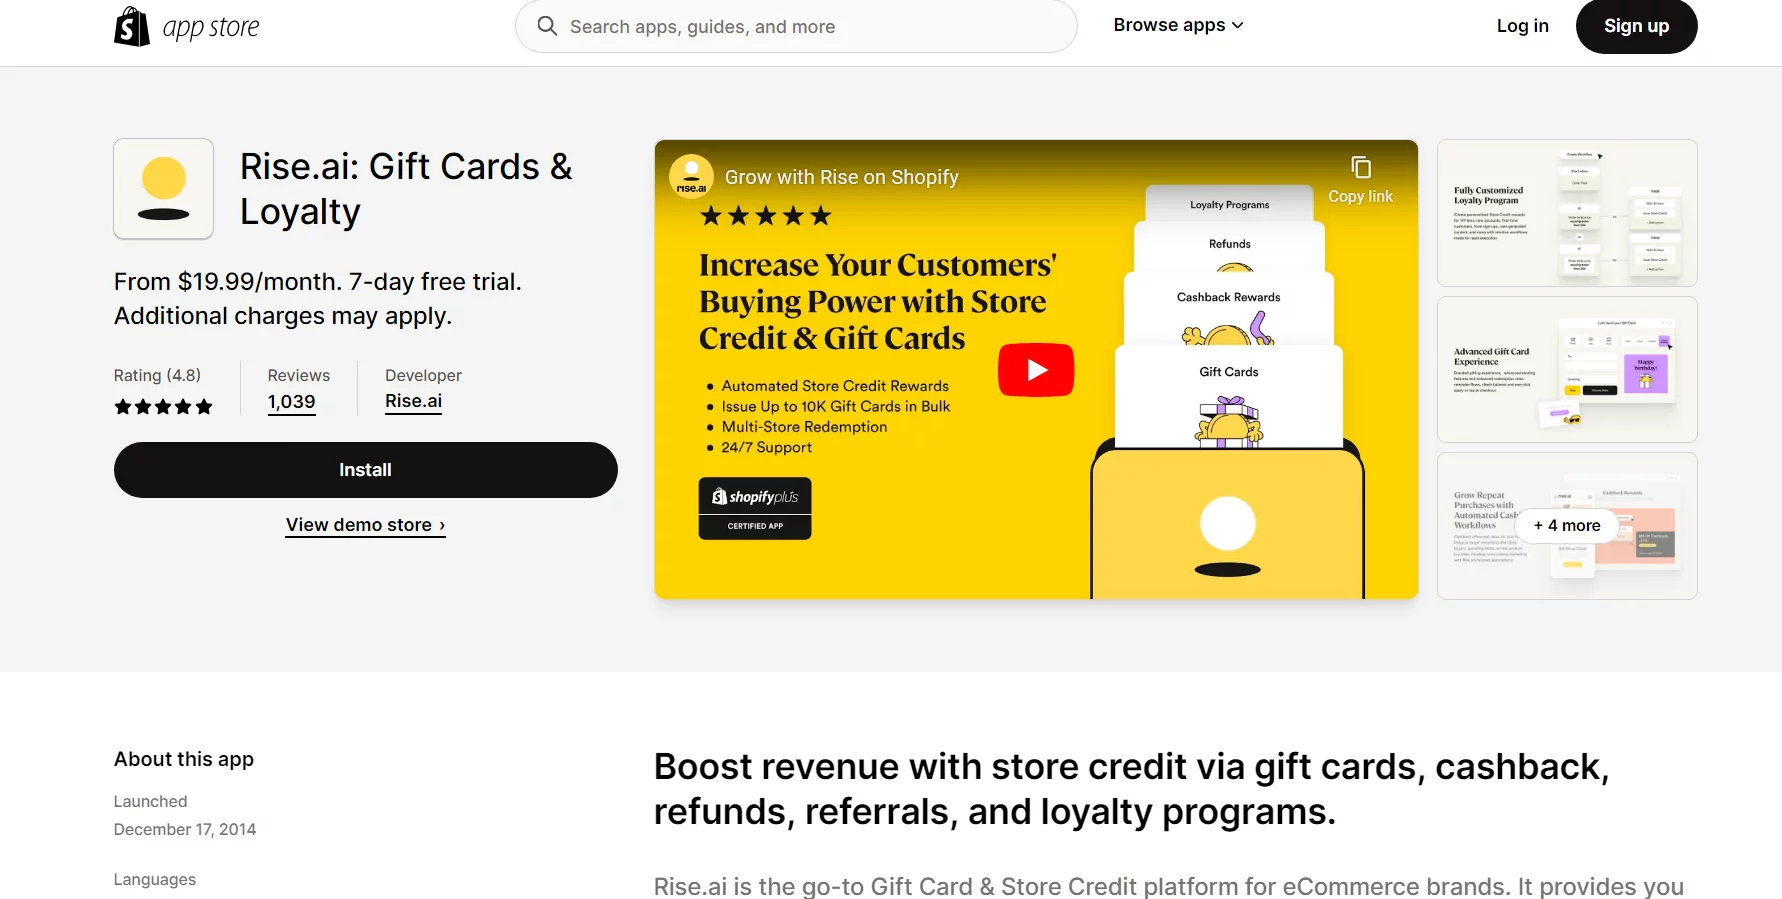 Best Shopify Referral Apps- Rise.ai: Gift Cards & Loyalty